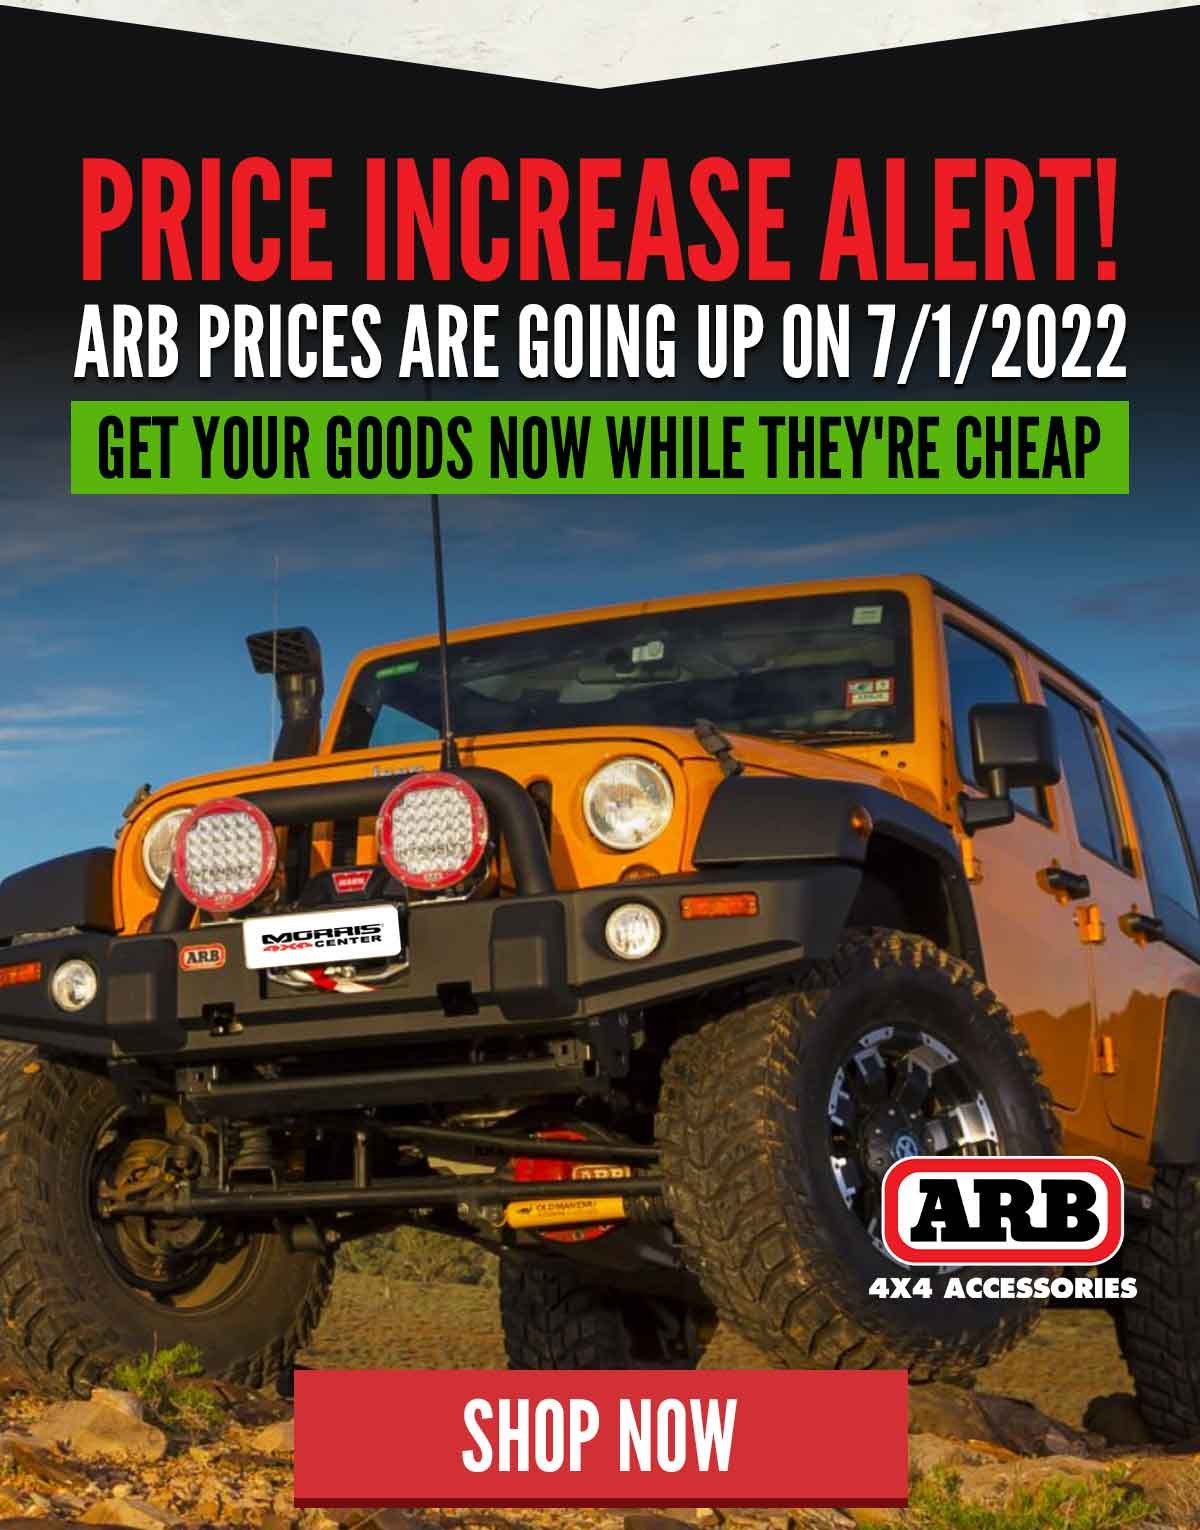 Price Increase Alert! ARB Prices Are Going Up On 7/1/2022 Get Your Goods Now While They're Cheap